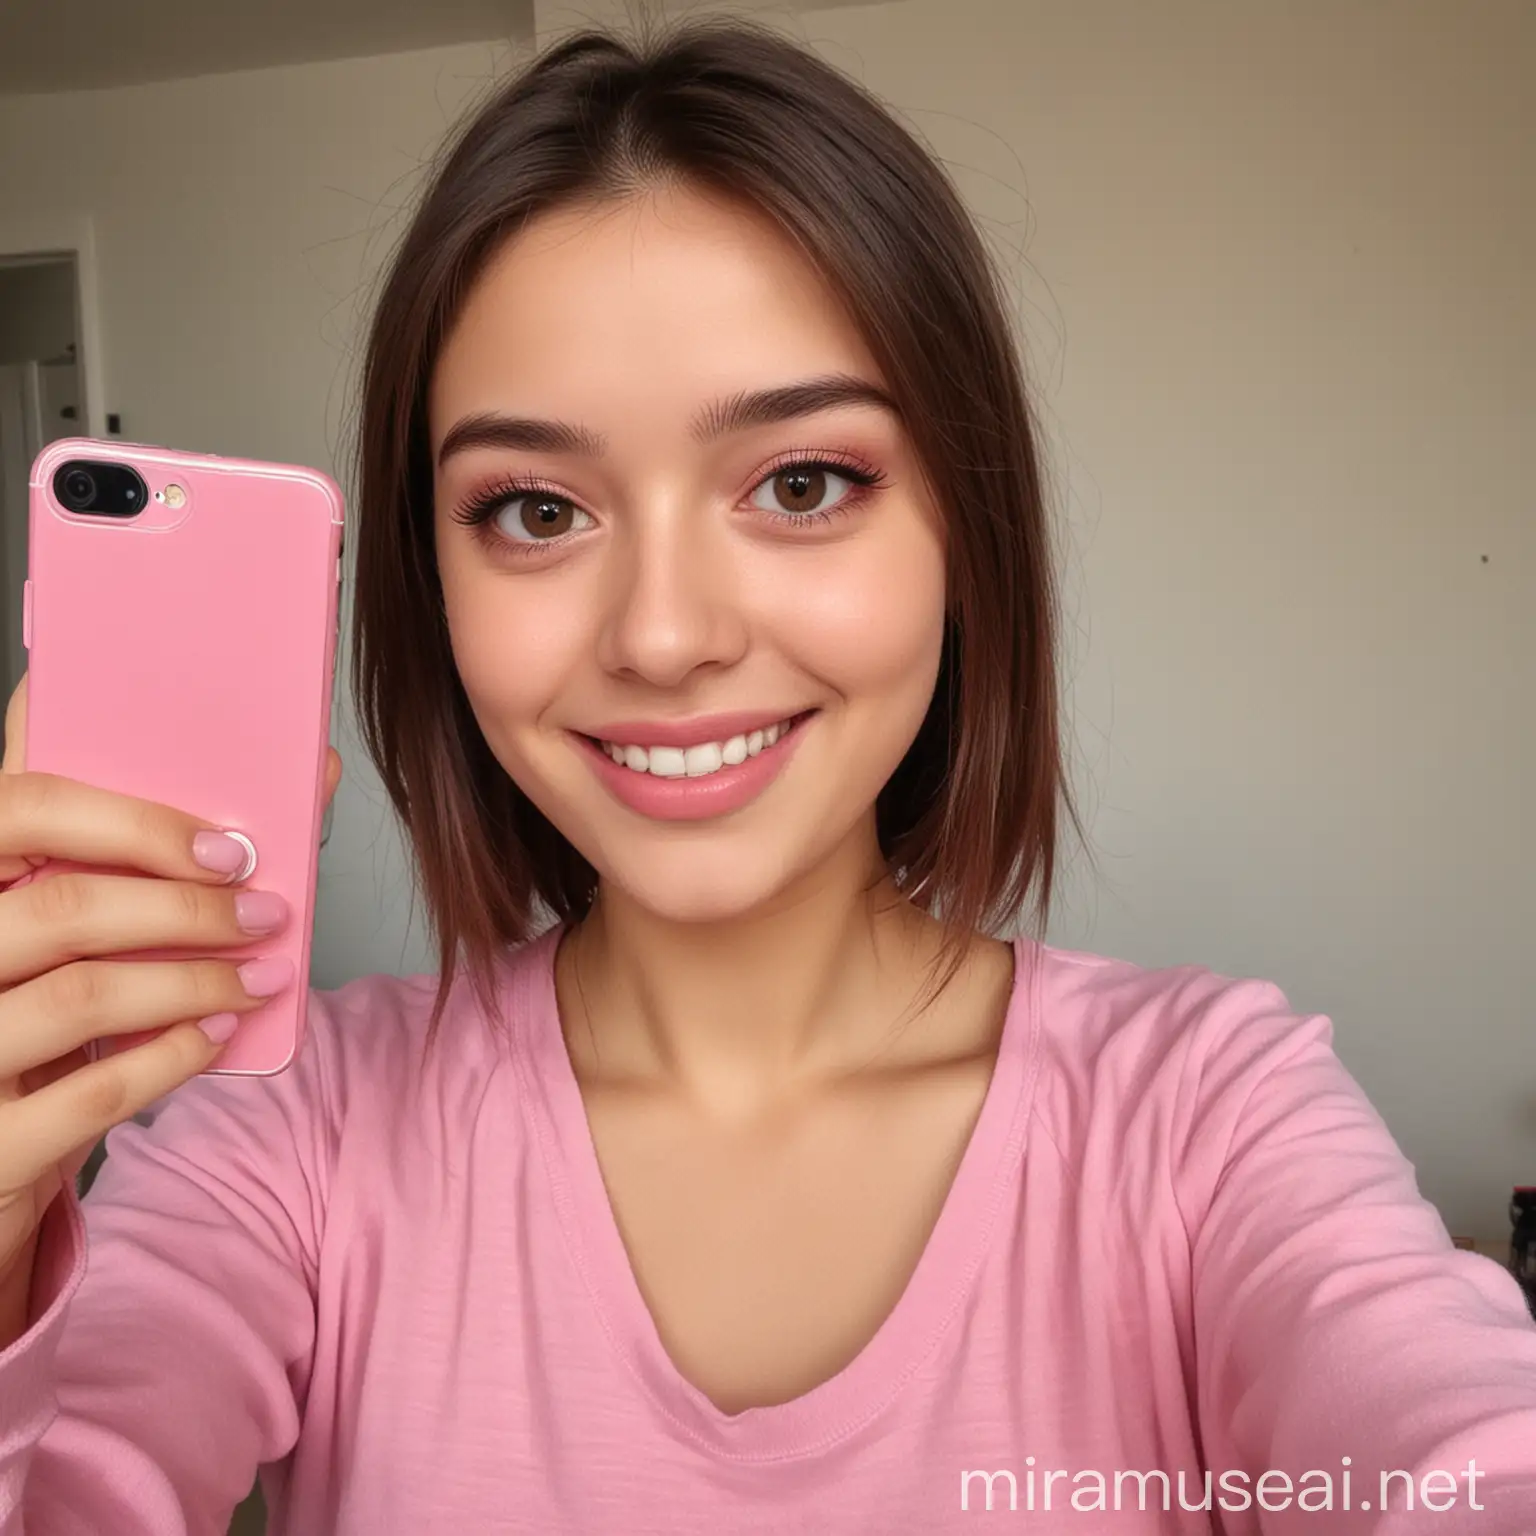 Foreign Girl in Pink Poses Joyfully for Selfie with Full Phone Display